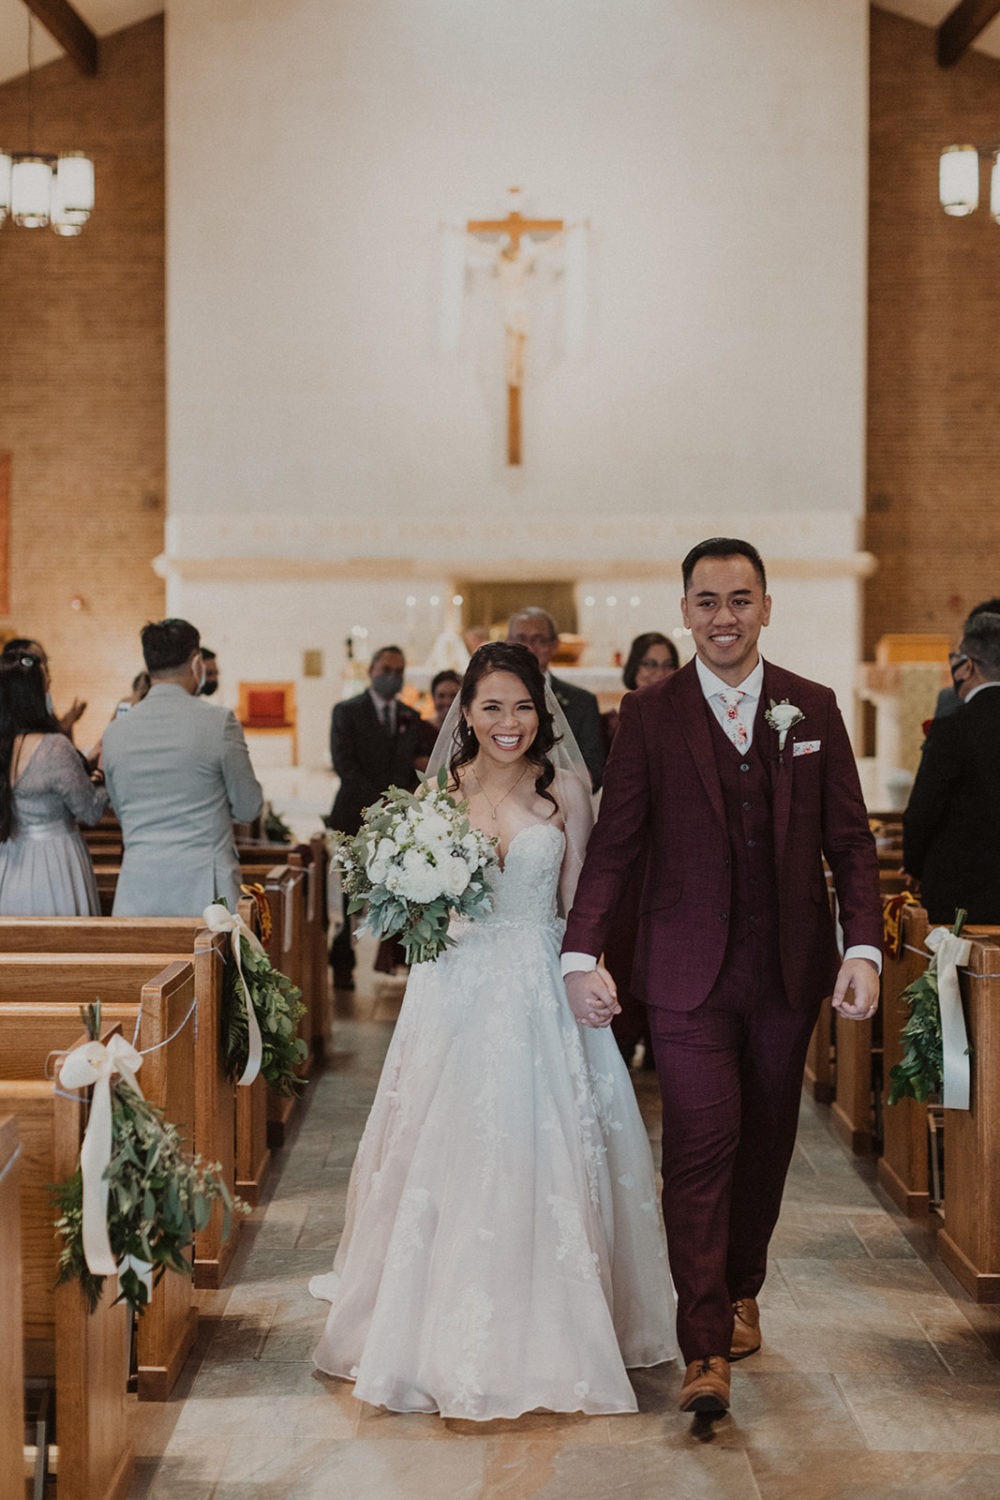 Couple exits holding hands at church wedding ceremony